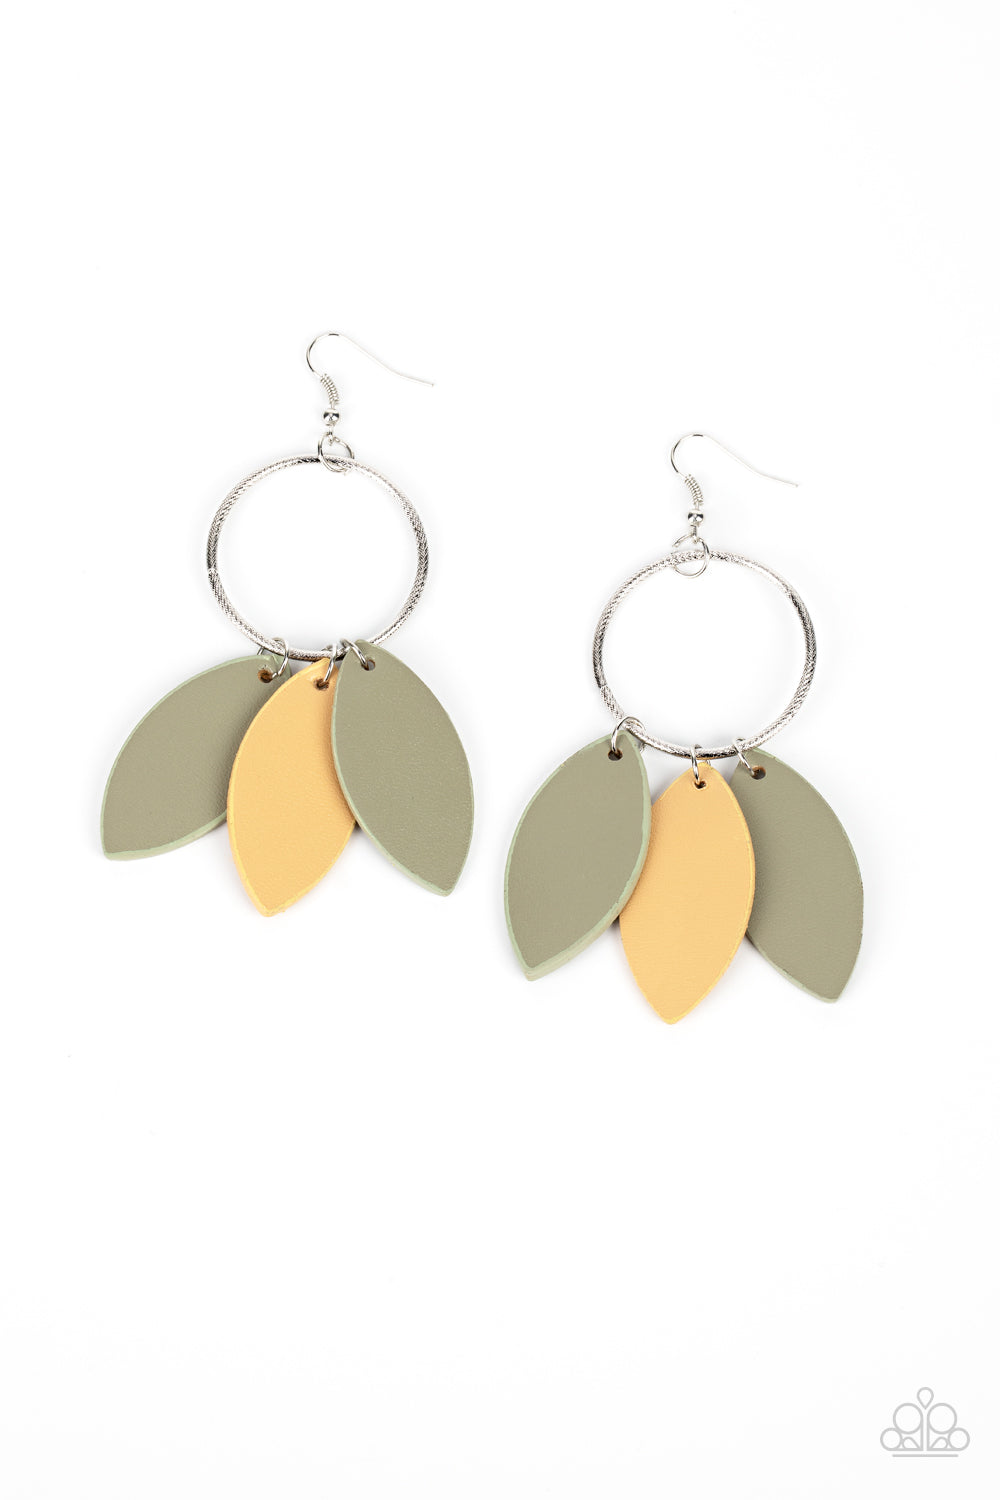 Leafy Laguna Multi Earring - Paparazzi Accessories  Leafy green and tan leather frames swing from the bottom of a textured silver hoop, creating an earthy fringe. Earring attaches to a standard fishhook fitting.  Sold as one pair of earrings.